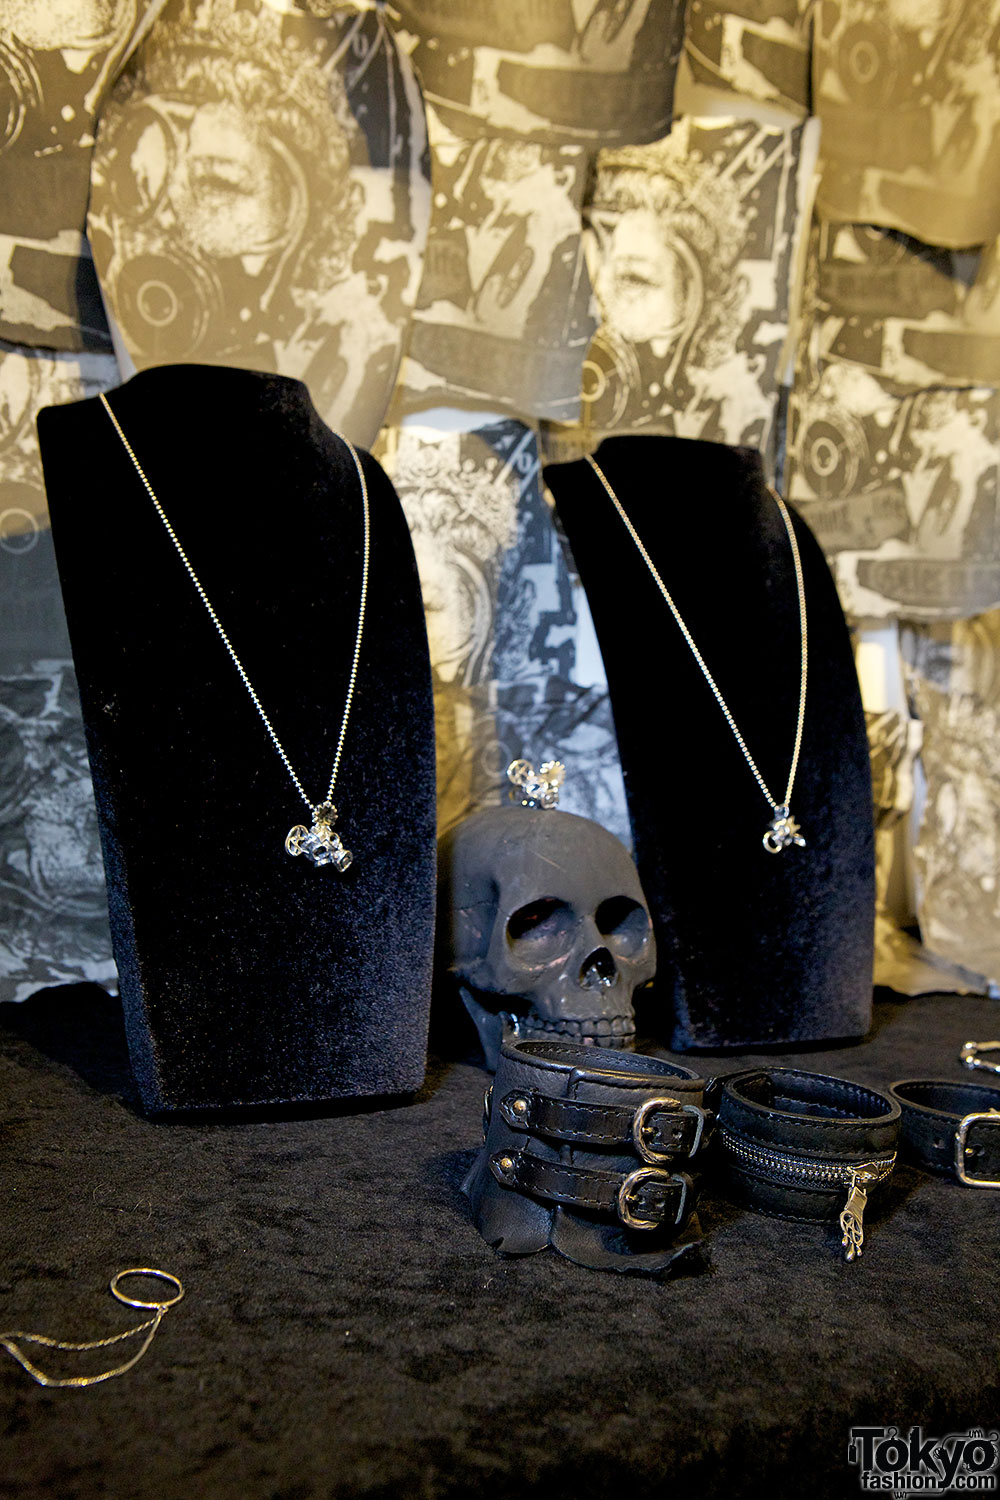 Alice Black Jewelry 2013 S/S Collection “The Meaning of Life